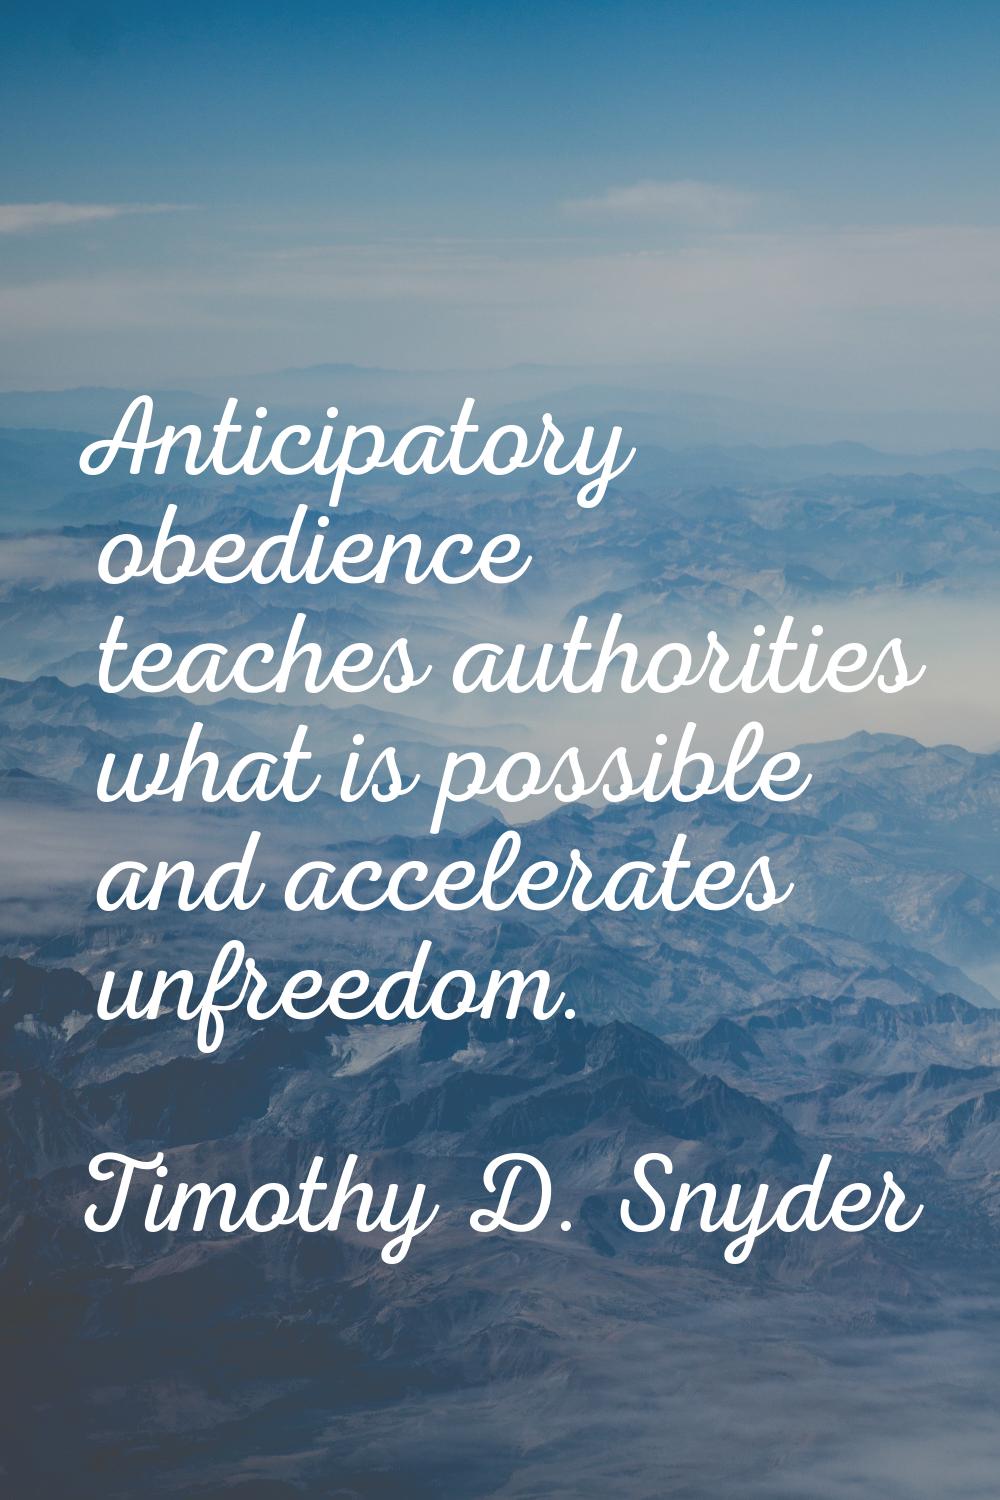 Anticipatory obedience teaches authorities what is possible and accelerates unfreedom.